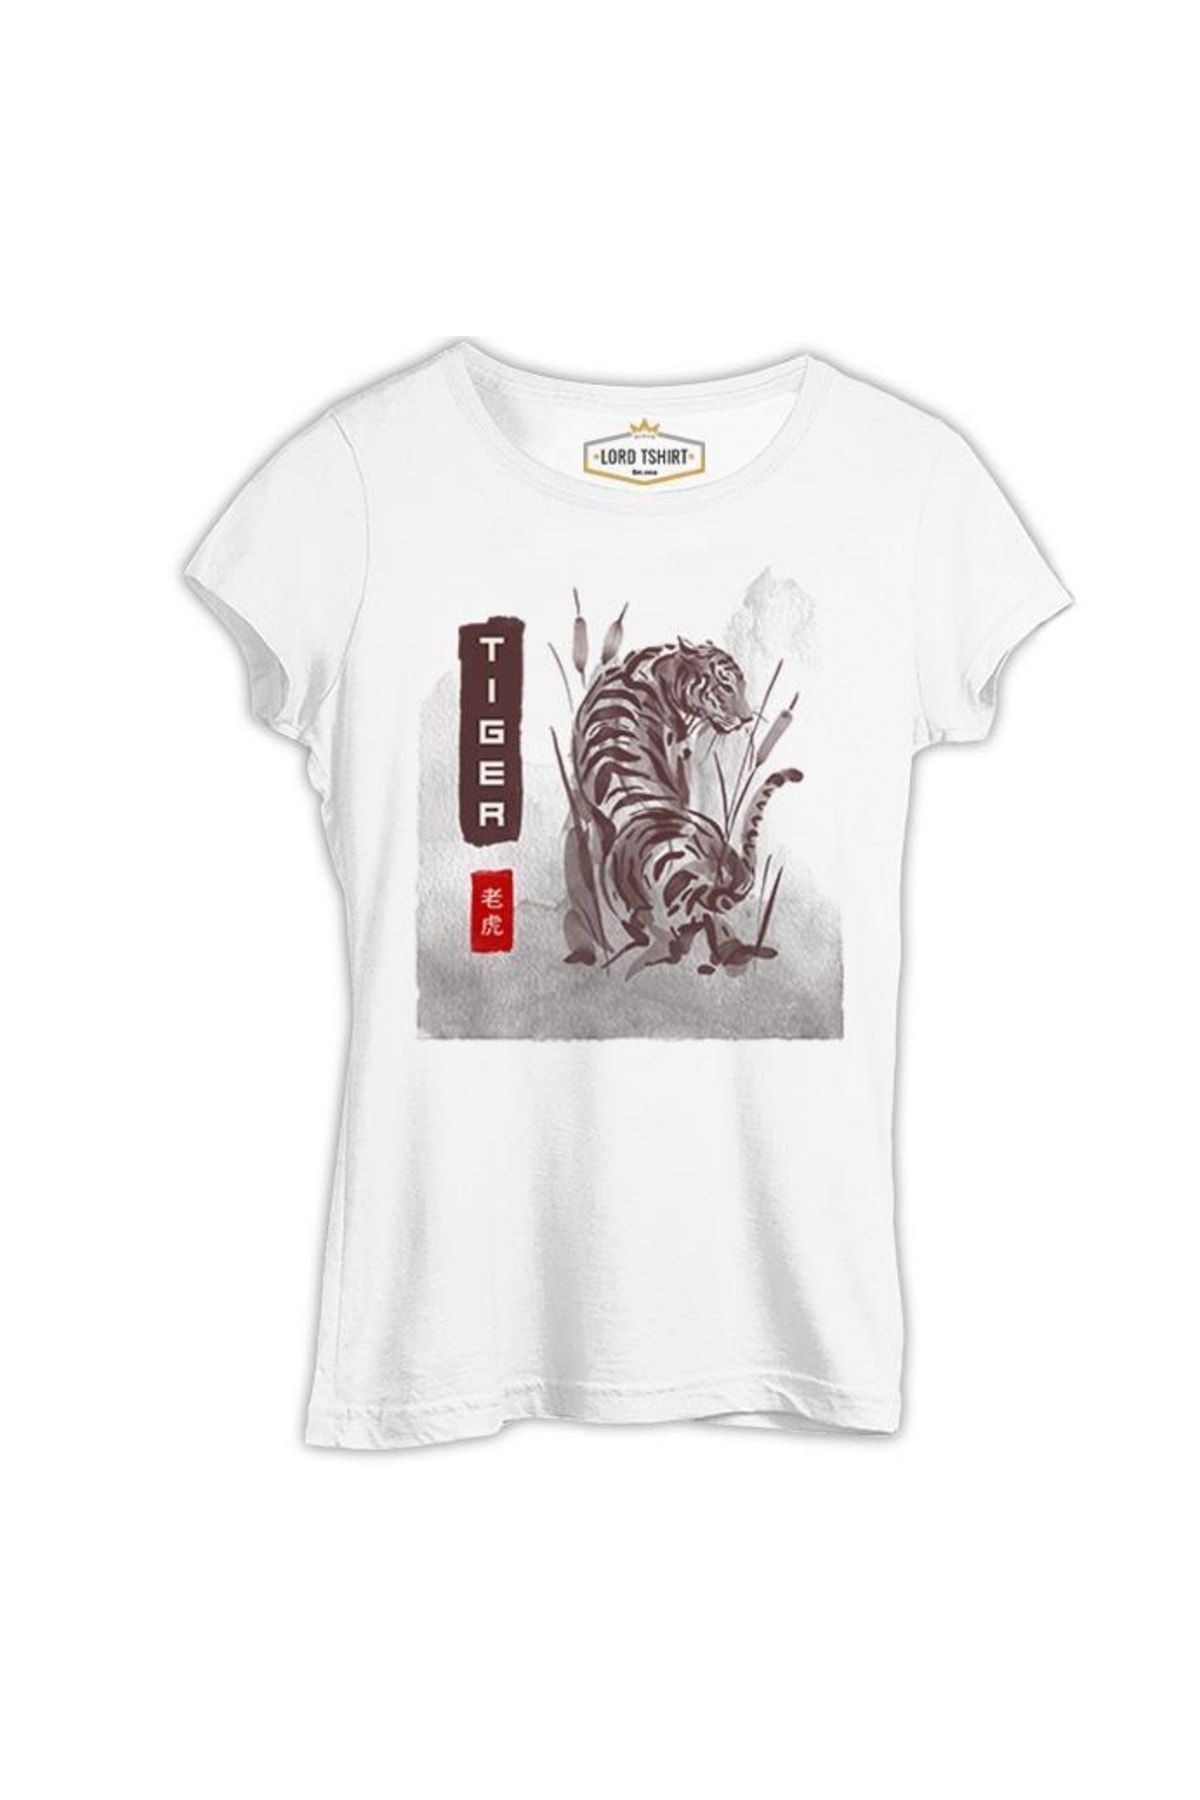 Lord T-Shirt Tiger Illustration In Chinese Style Beyaz Tshirt